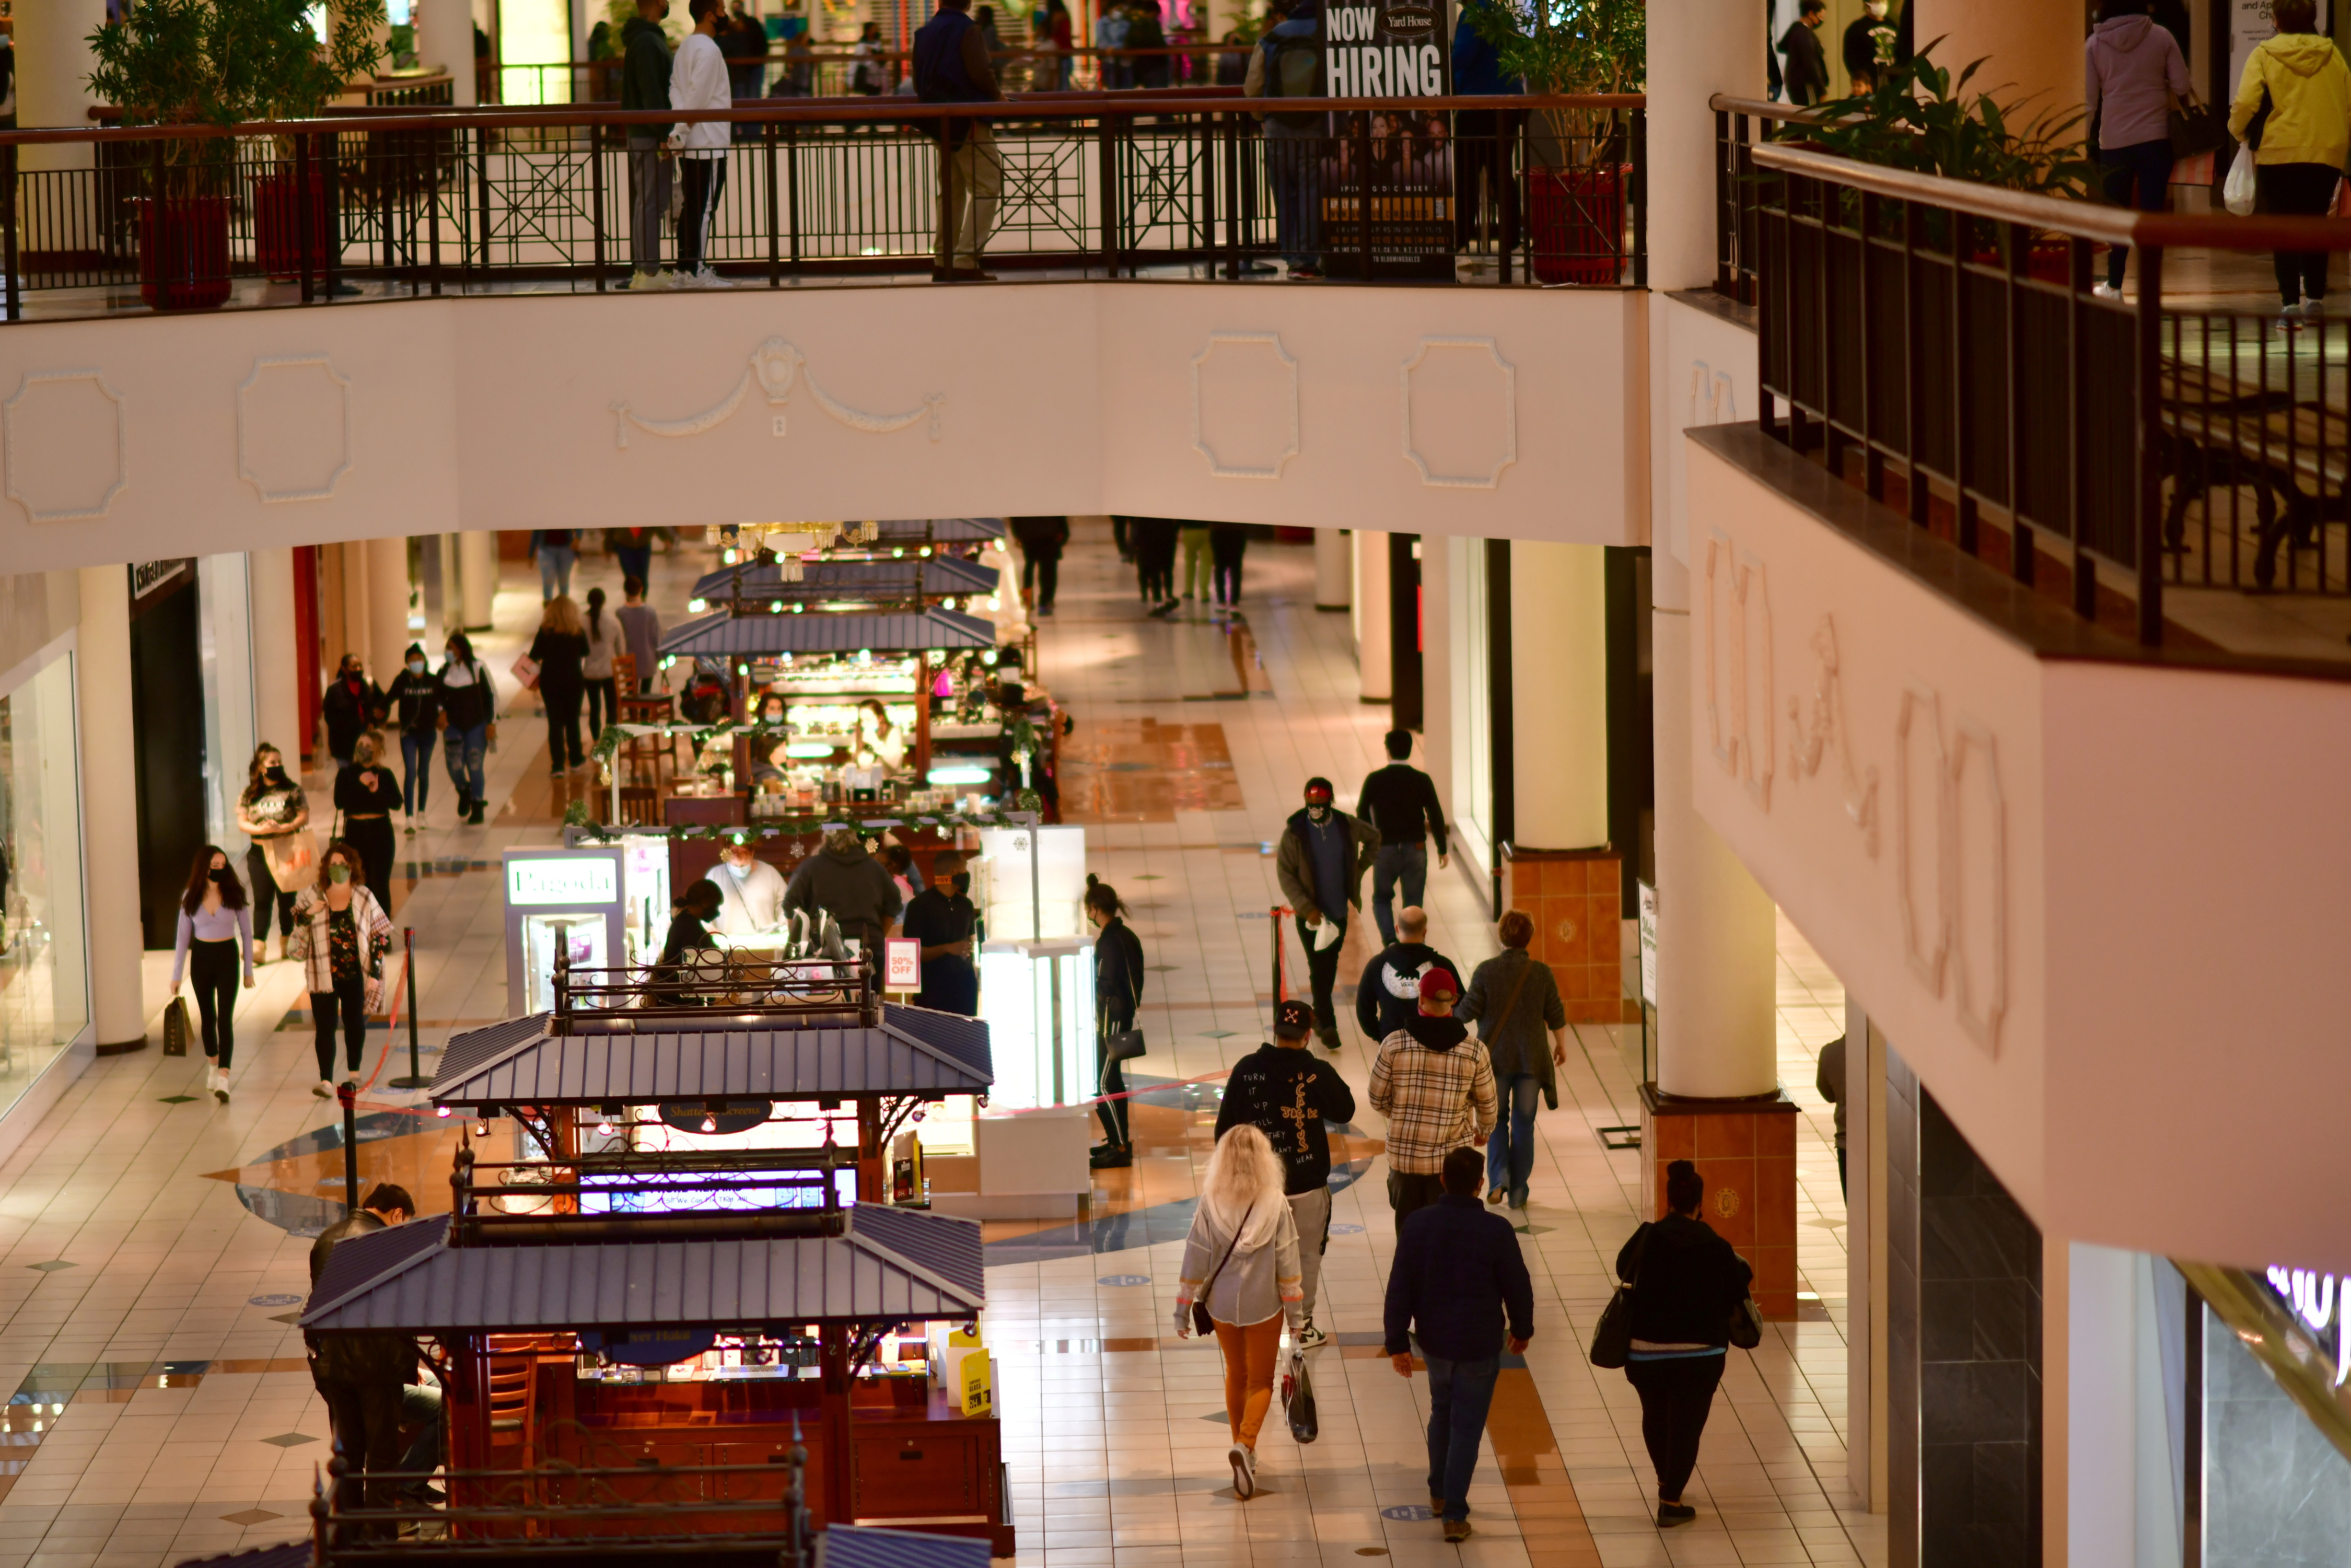 Shoppers carry bags of purchased merchandise at the Willow Grove Park Mall in Willow Grove